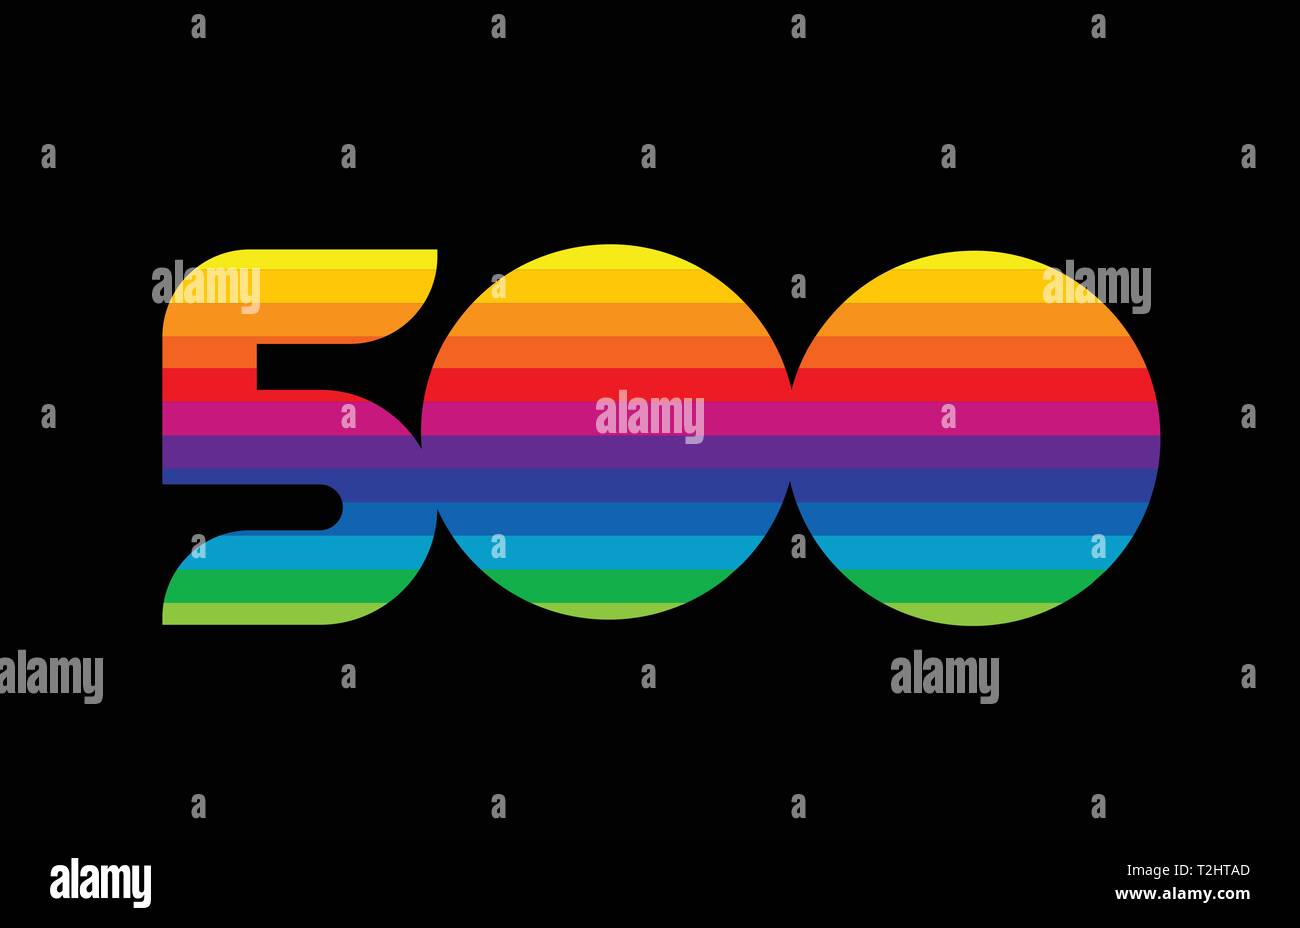 rainbow color colored colorful number 500 logo design suitable for a company or business Stock Vector